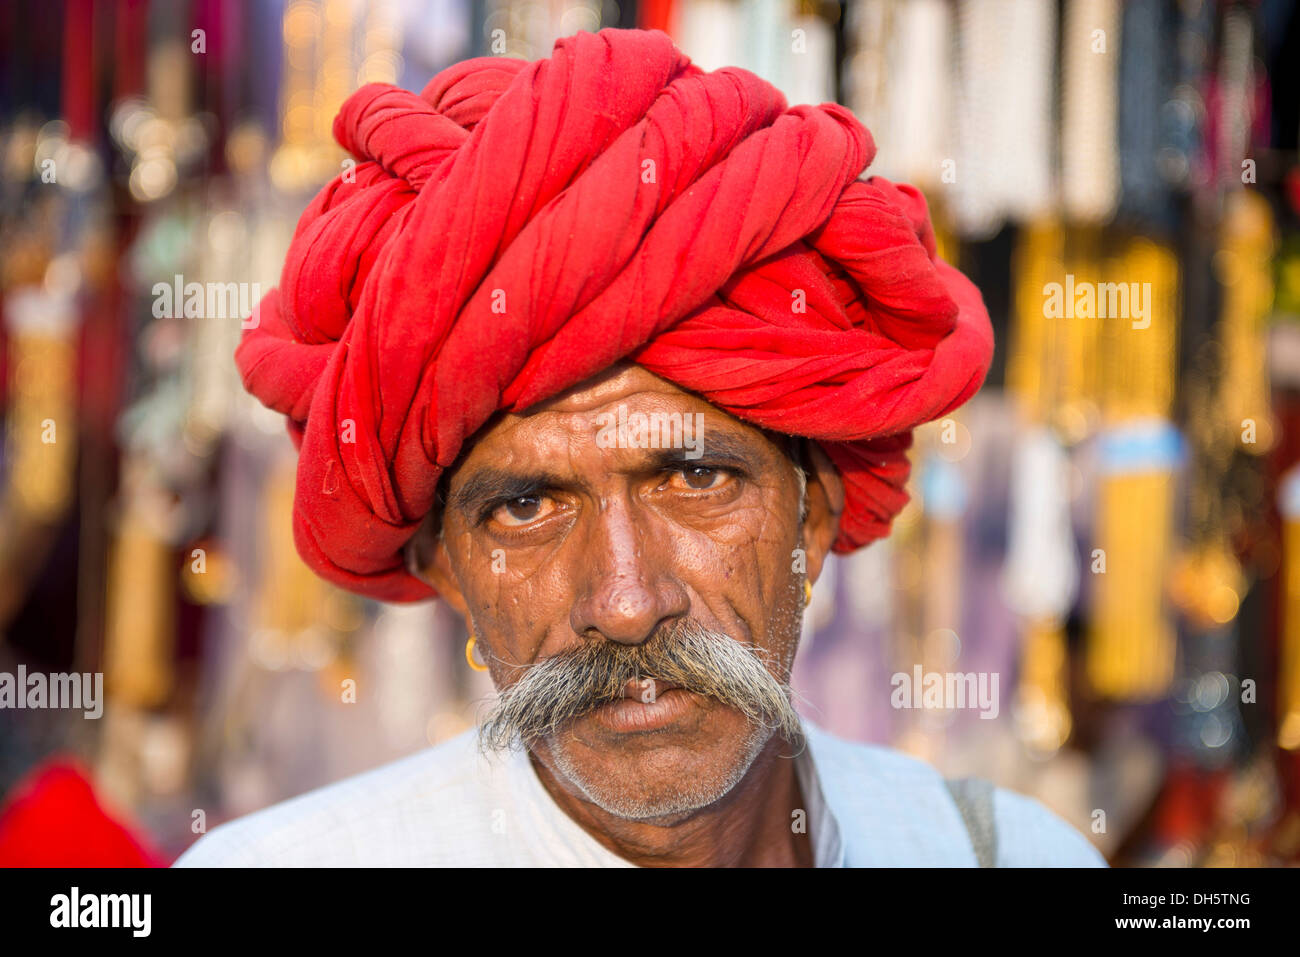 Old Indian man with a red turban, portrait, Pushkar, Rajasthan, India Stock Photo